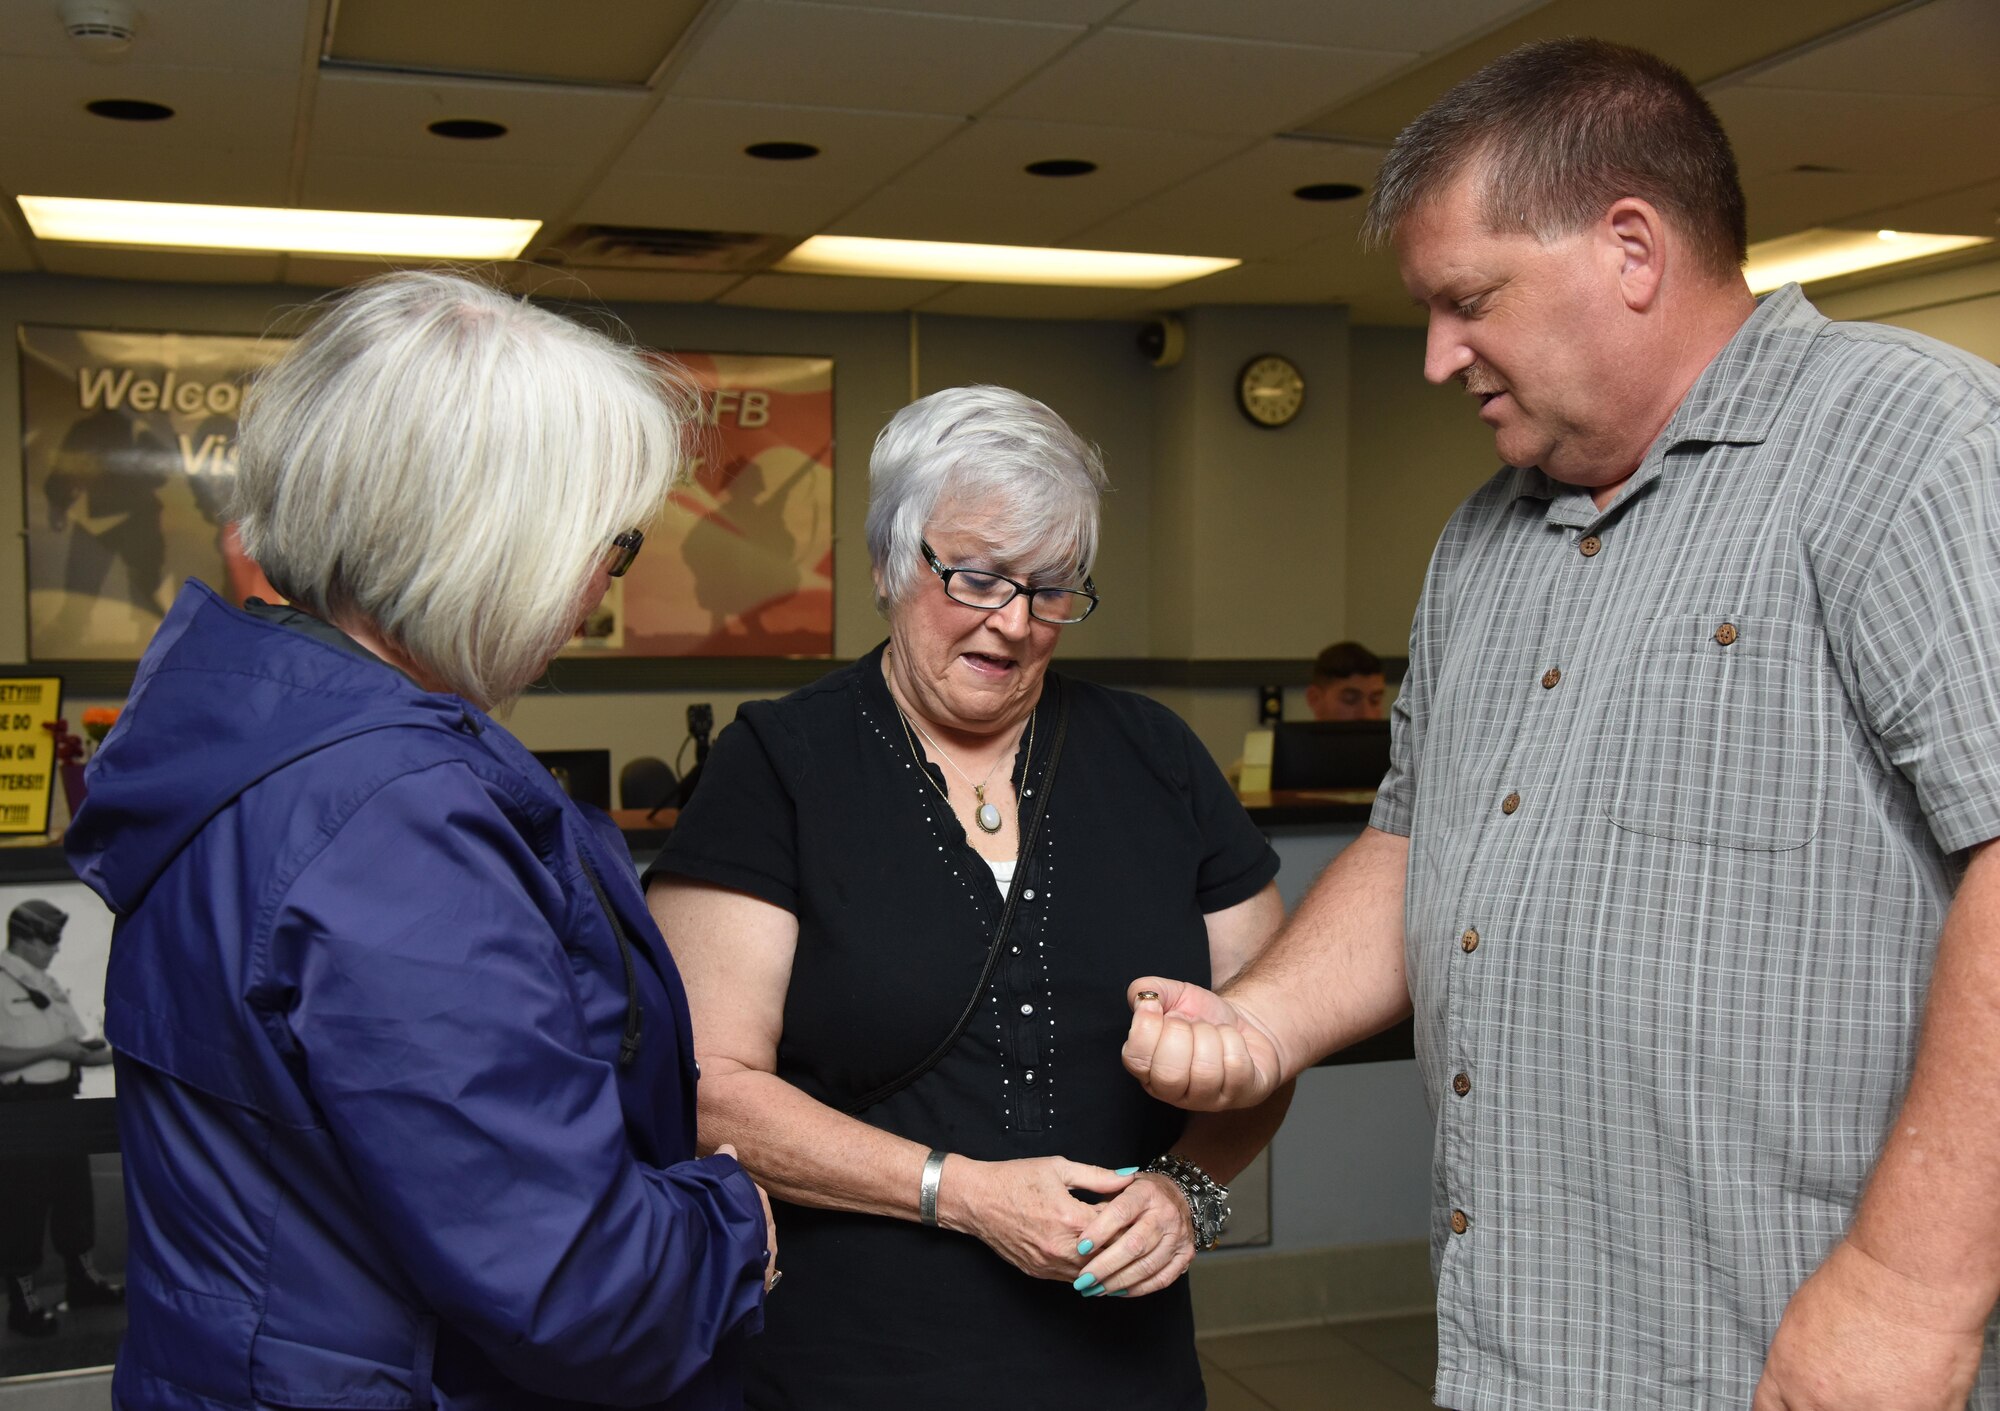 Jackie Pope, 81st Force Support Squadron Airman & Family Readiness Center chief, and John Lowe, 81st FSS community readiness consultant, present Nora Moore with a Gold Star Family Member lapel pin at the visitor center Aug. 29, 2017, on Keesler Air Force Base, Mississippi. As a surviving daughter of a missing in action service member, Moore is allowed to obtain an ID card for recognition and installation access so that she can attend events and access A&FRC referral services. She is Keesler’s first Gold Star Family Member. (U.S. Air Force photo by Kemberly Groue)